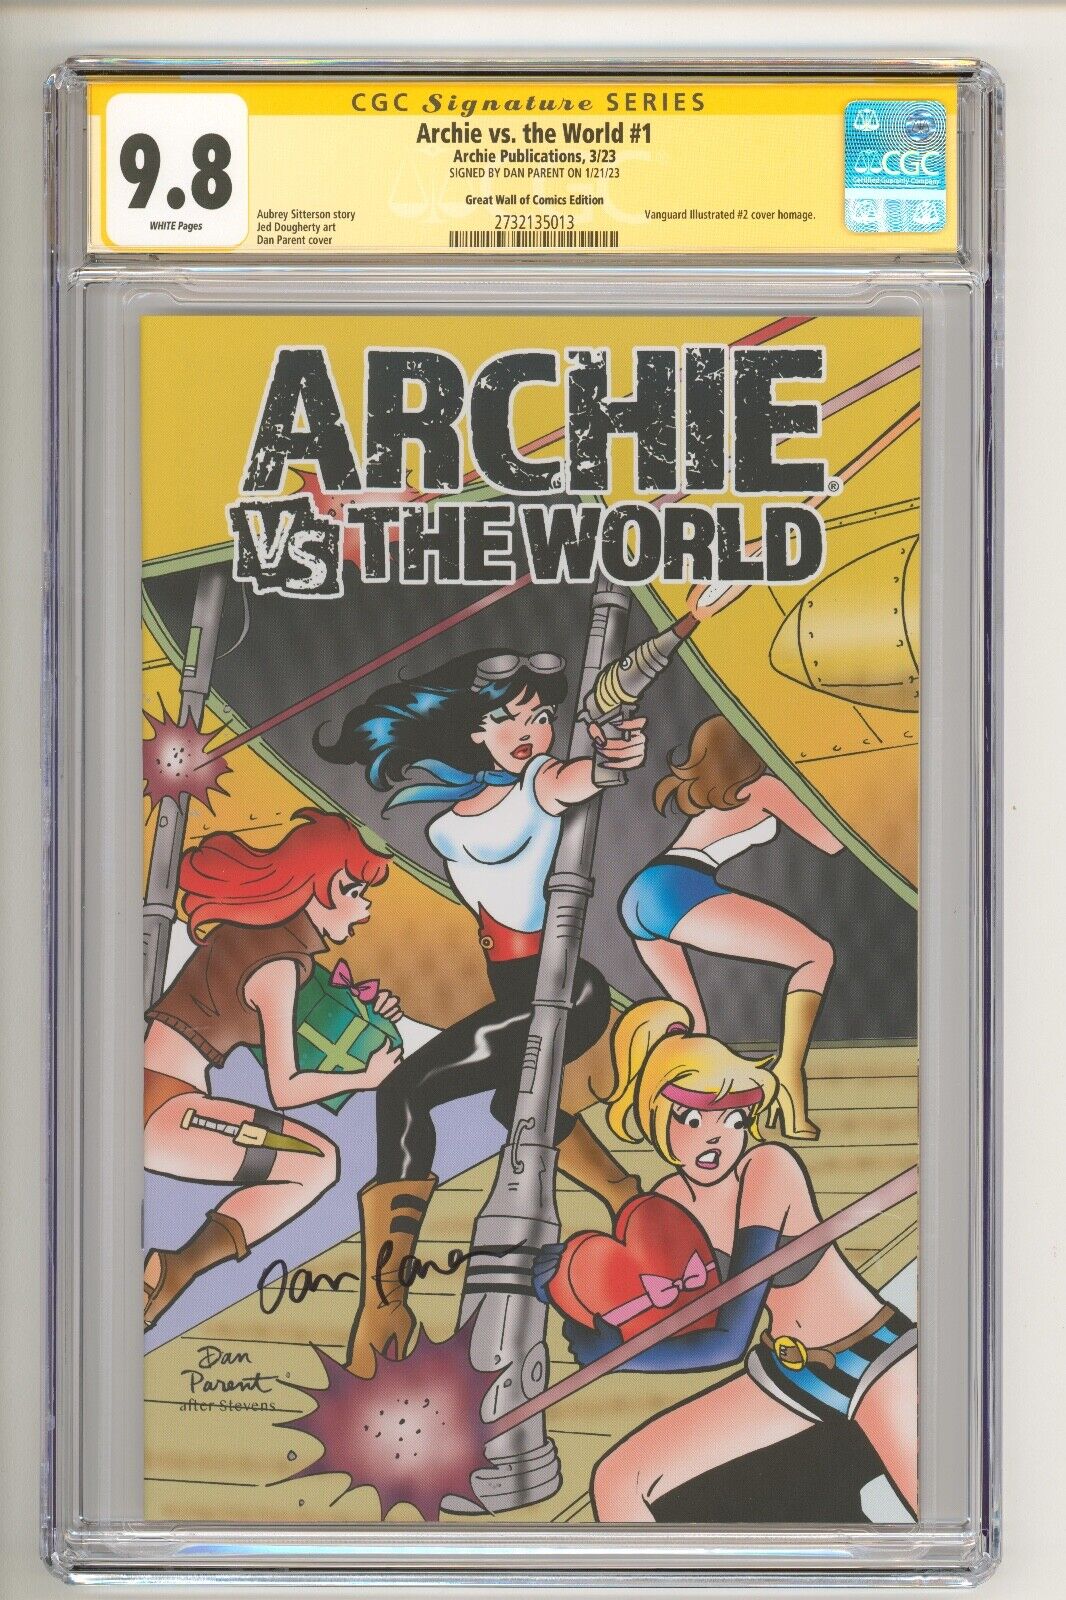 Archie vs the World' #1 Dan Parent Homage Cover CGC 9.8 - Signed